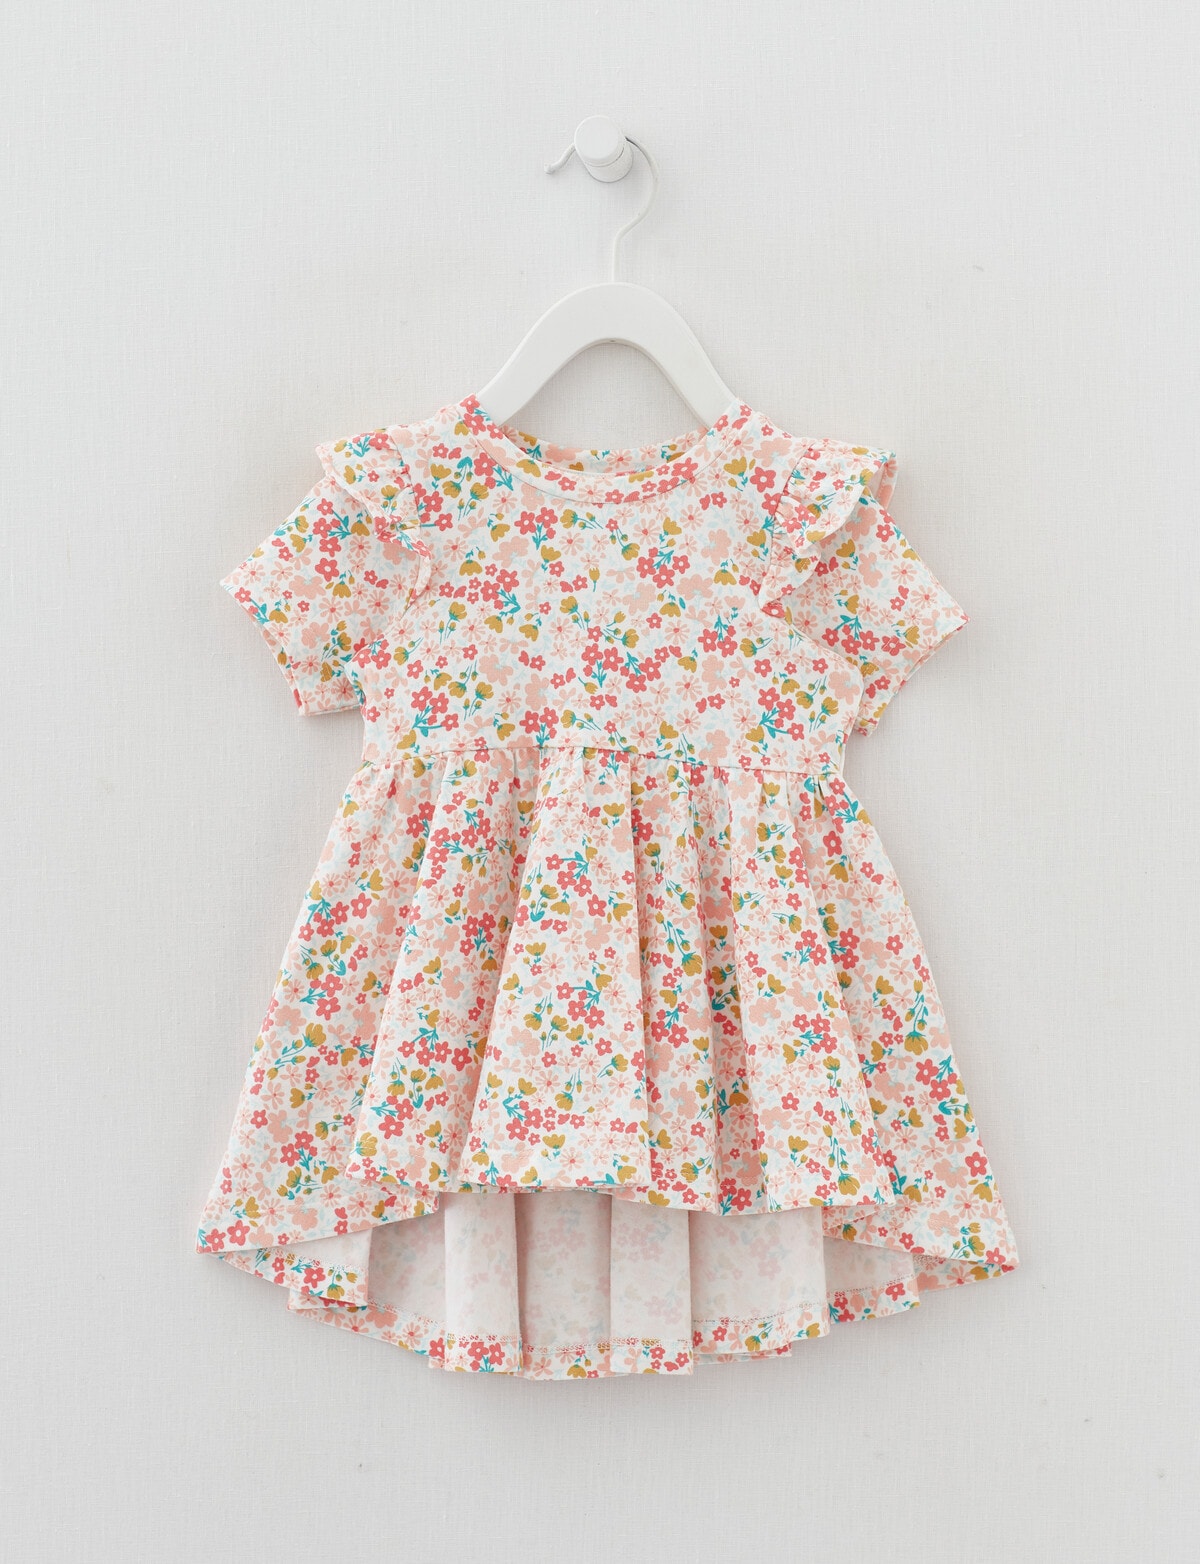 Teeny Weeny Ditsy Floral Dress, White - Dresses & Skirts